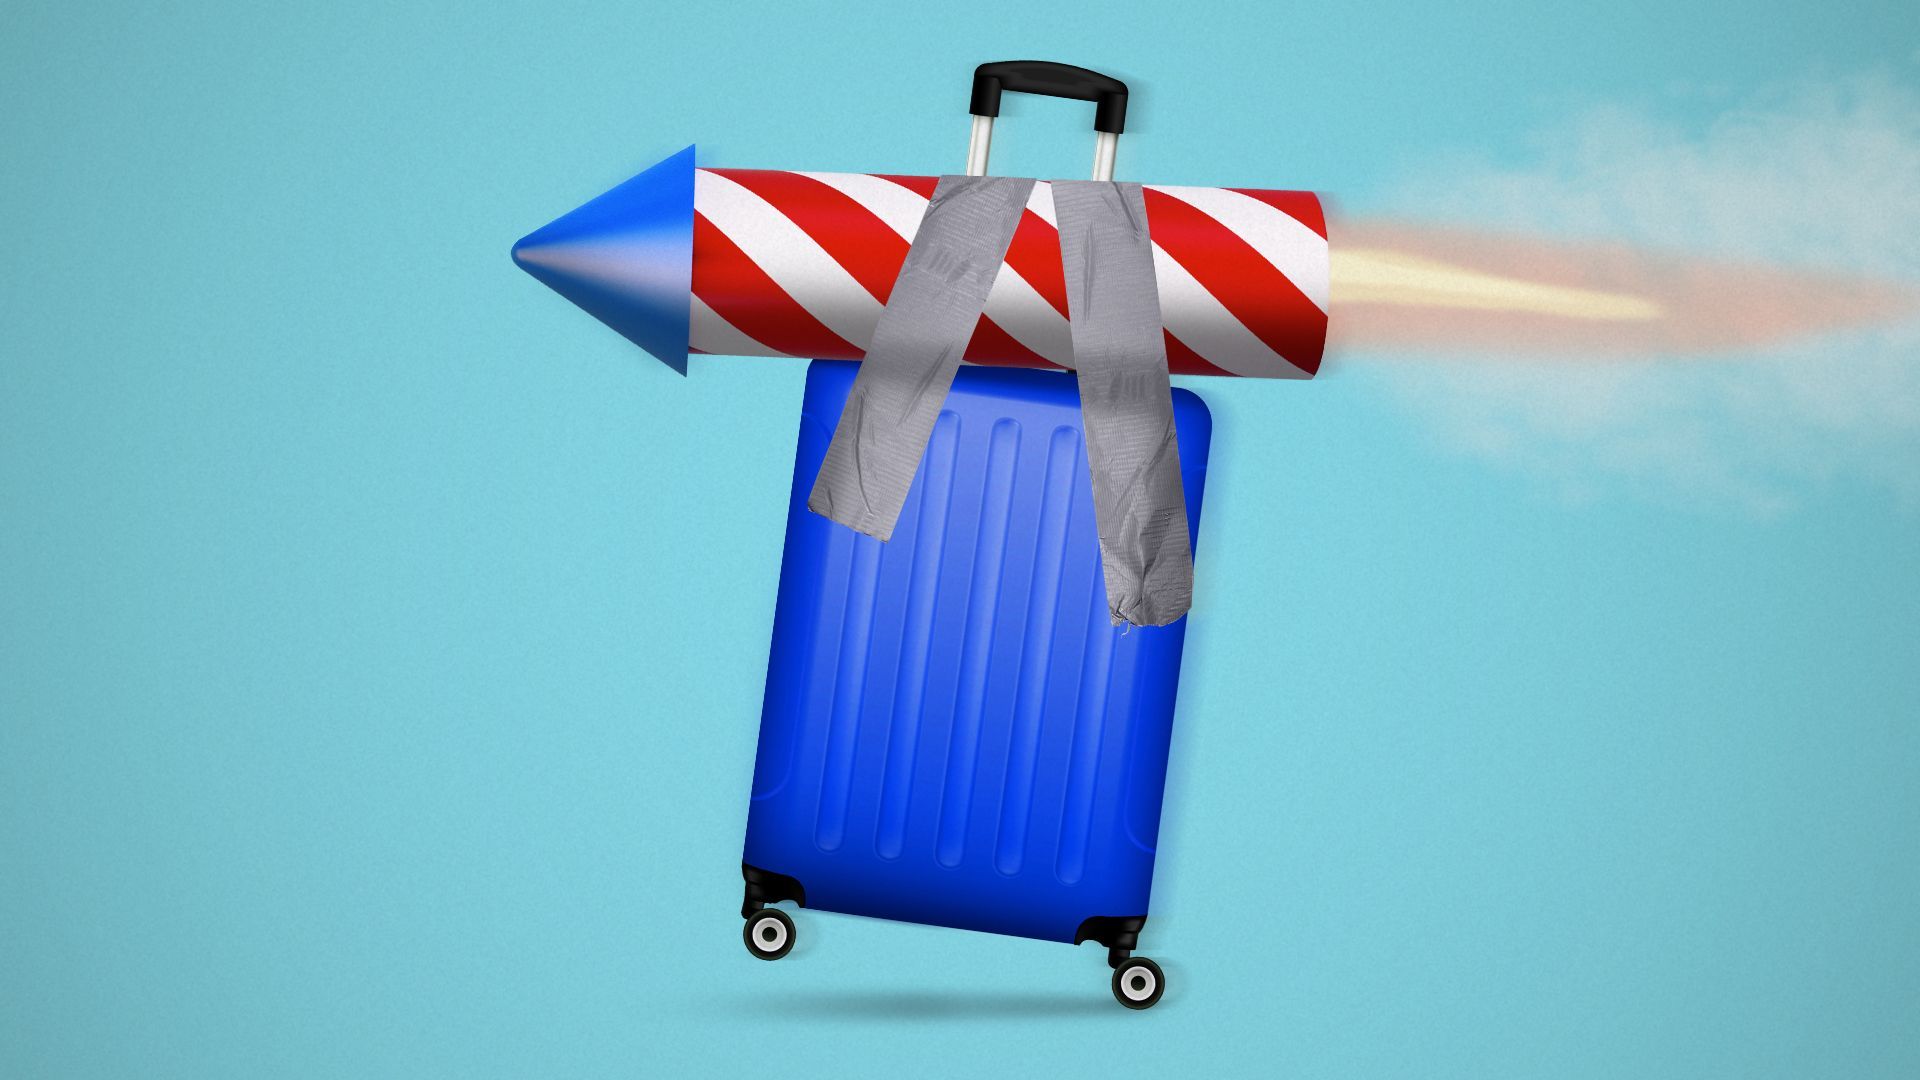 Illustration of a rolling suitcase taped to a propelling rocket firework.